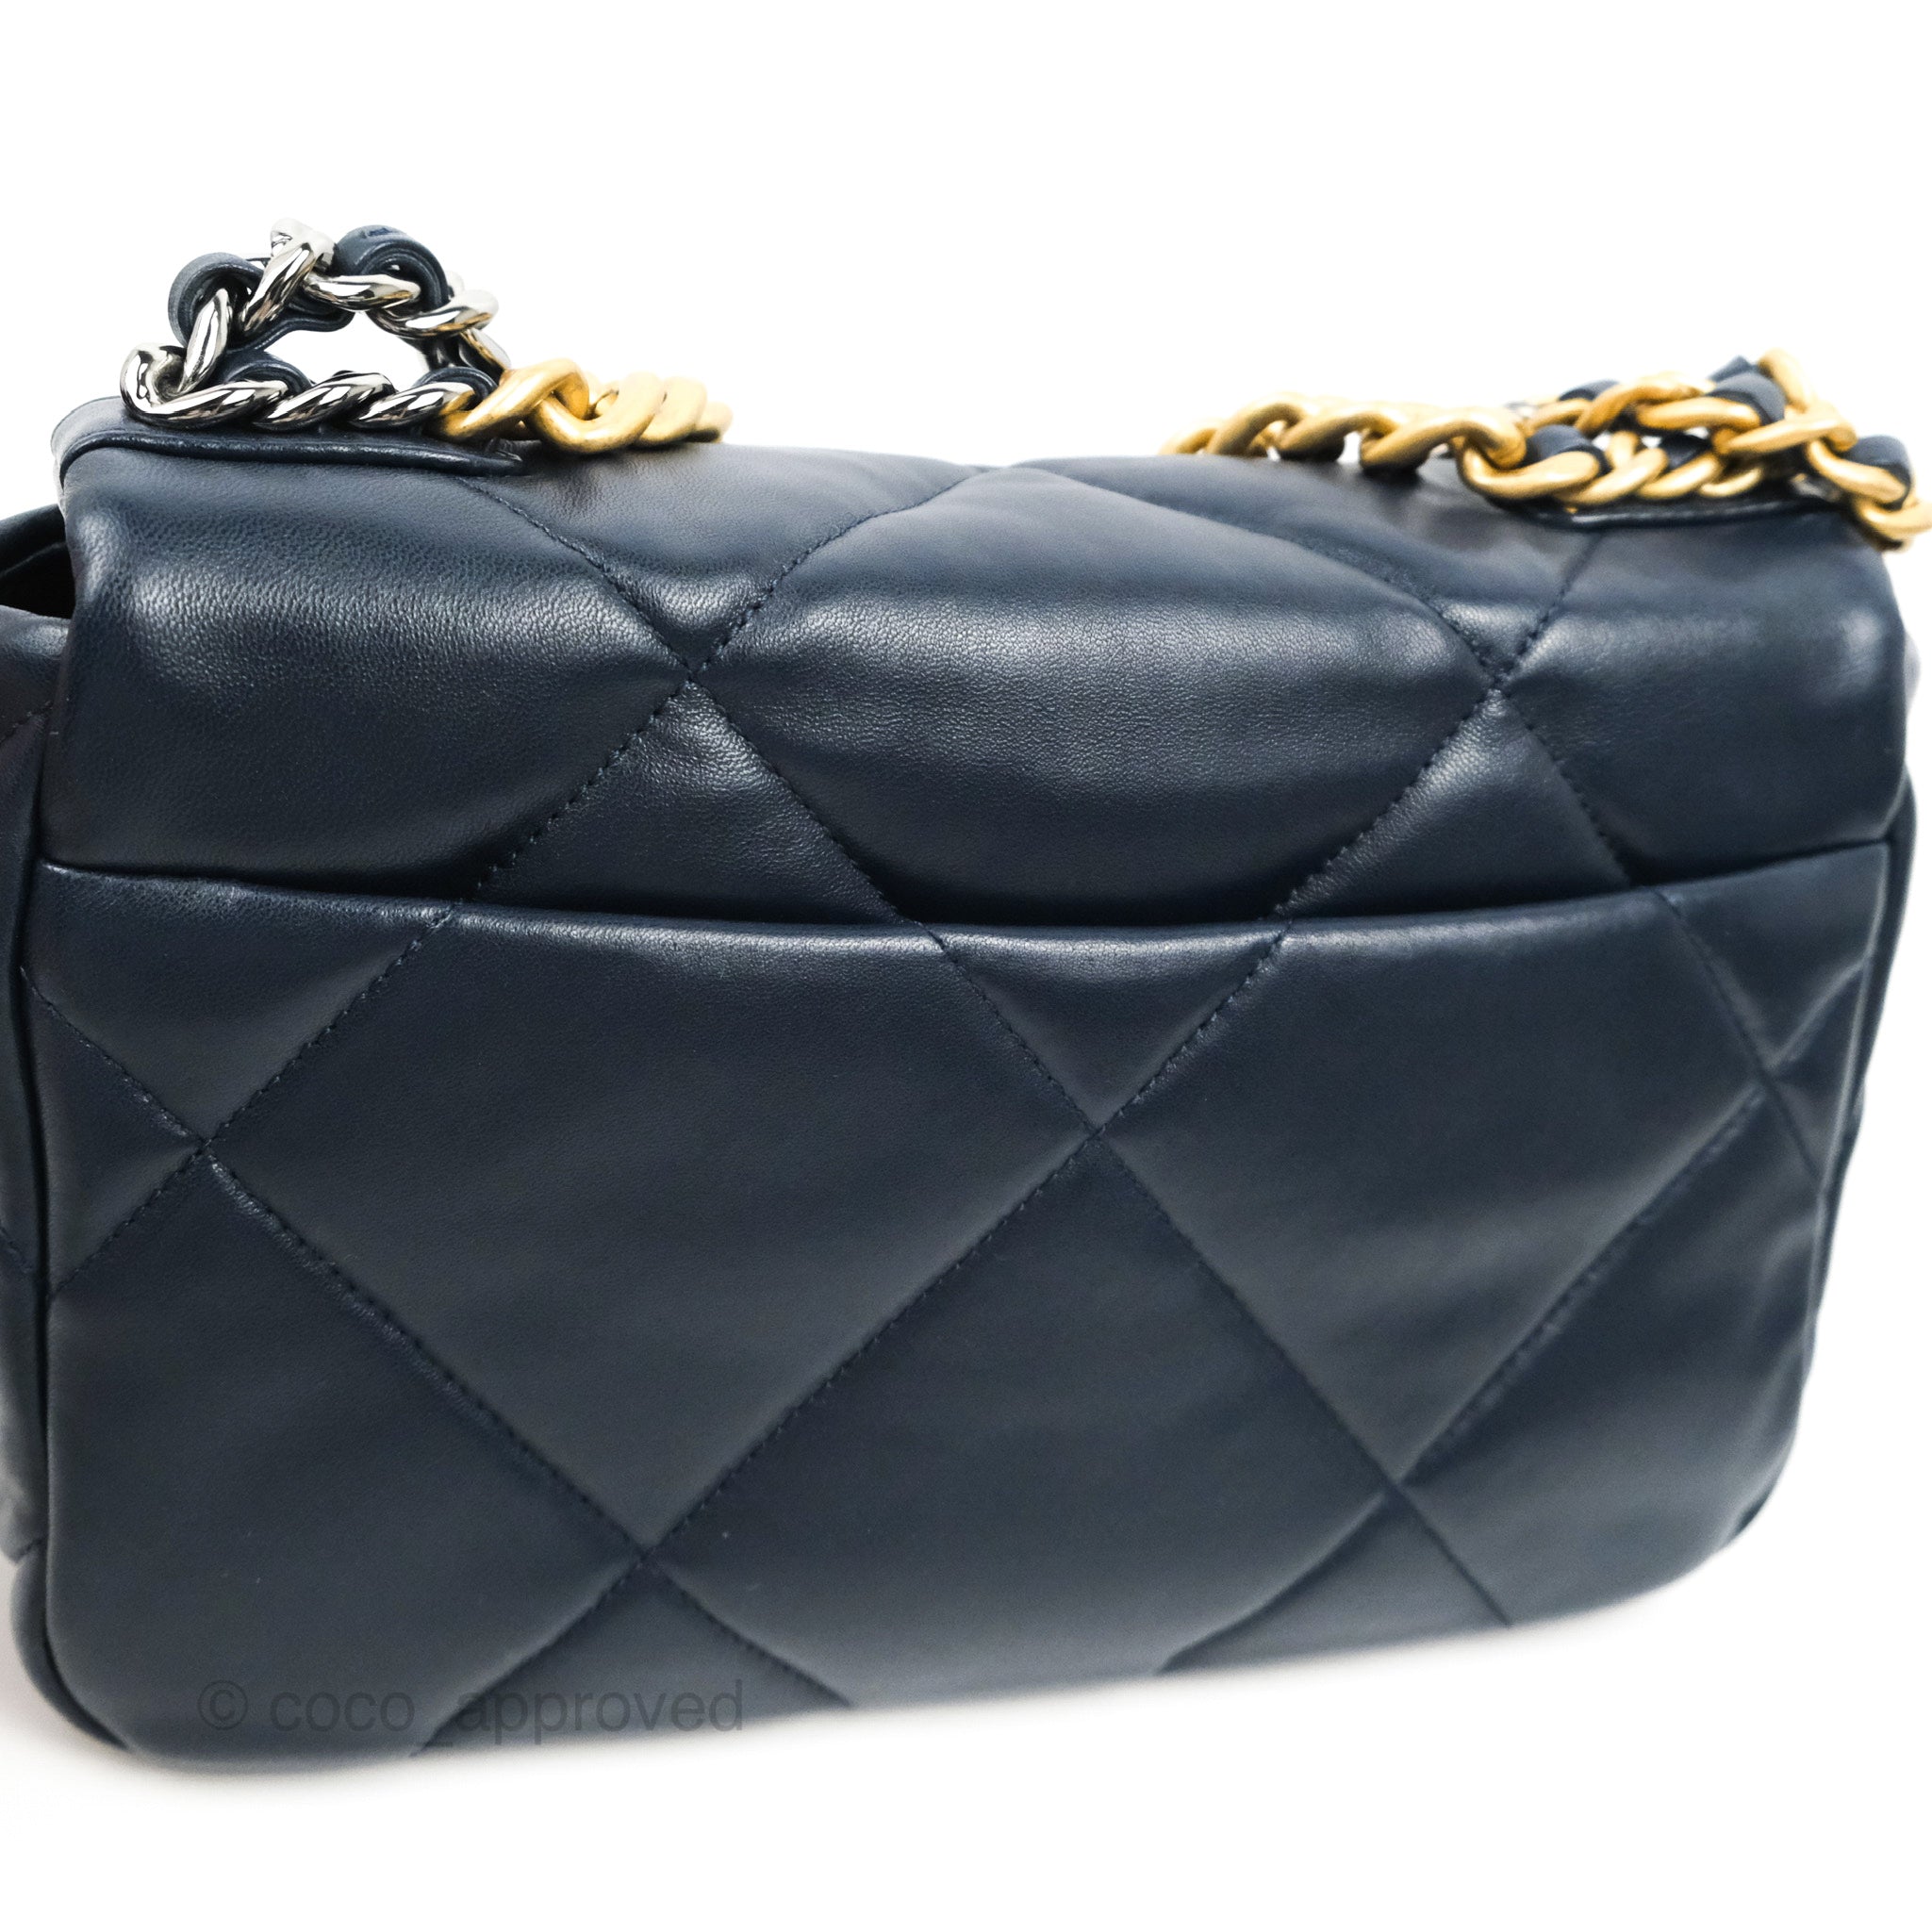 Chanel 19 Small Navy Lambskin Mixed Hardware – Coco Approved Studio